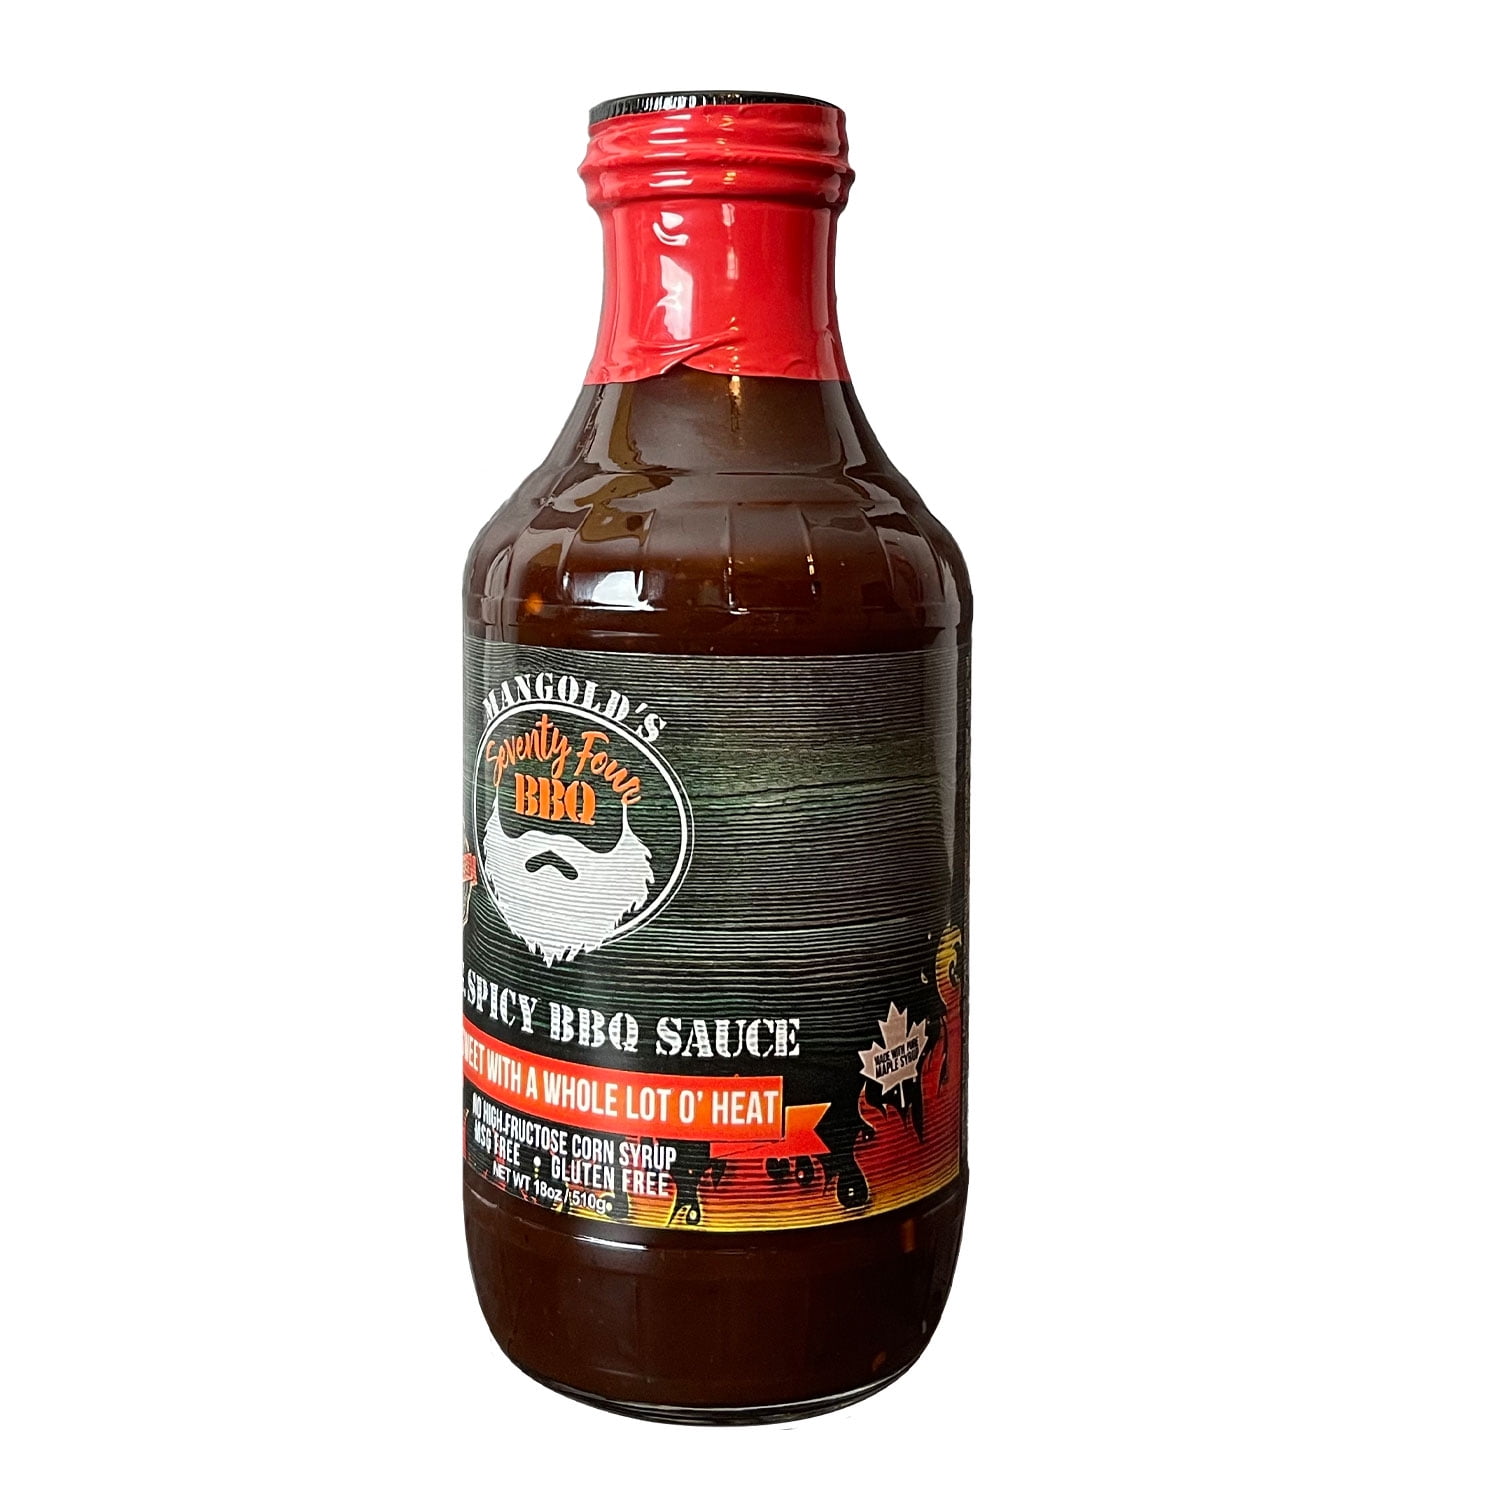 Whole for beef, Mangold\'s A Oz, ribs Sauce BBQ 74 18 sauce Sweet and BBQ Small Lot Batch grill, Heat, O.G, perfect pork, chips. with chicken, Barbeque Little Of